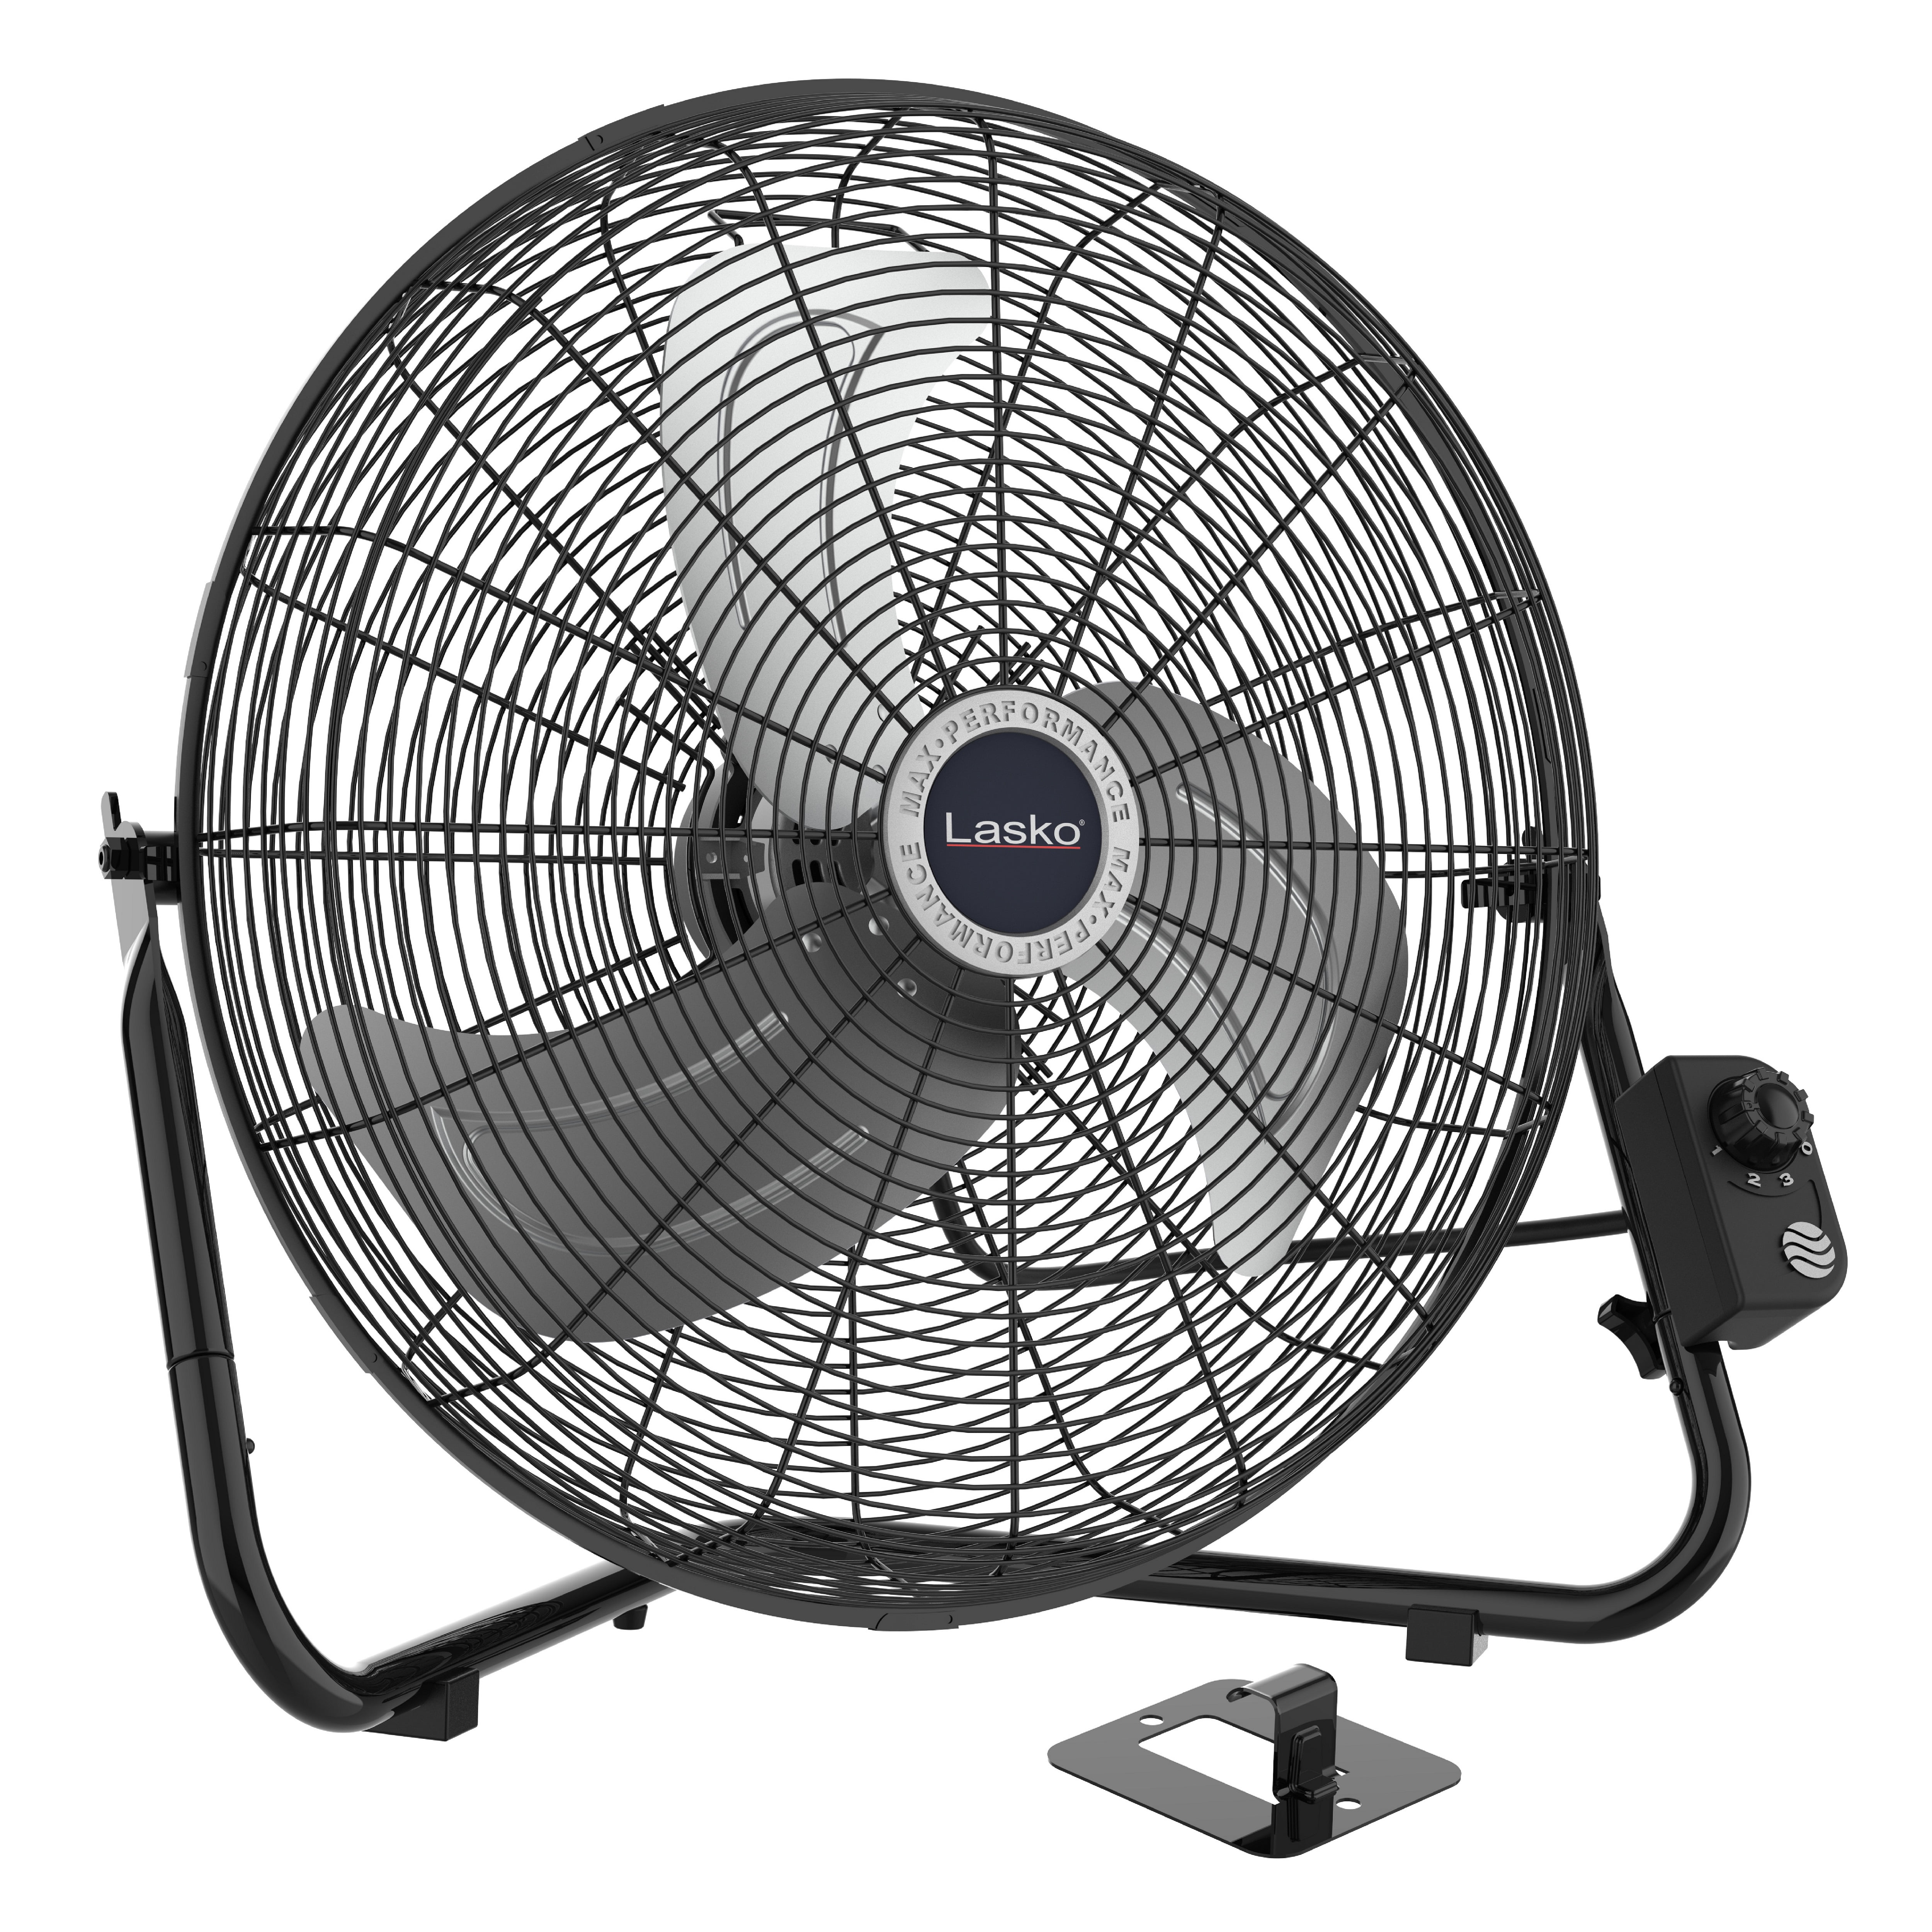 New 20" Floor Fan High Velocity 3 Speed Air Circulating Strong Powerful Airflow 